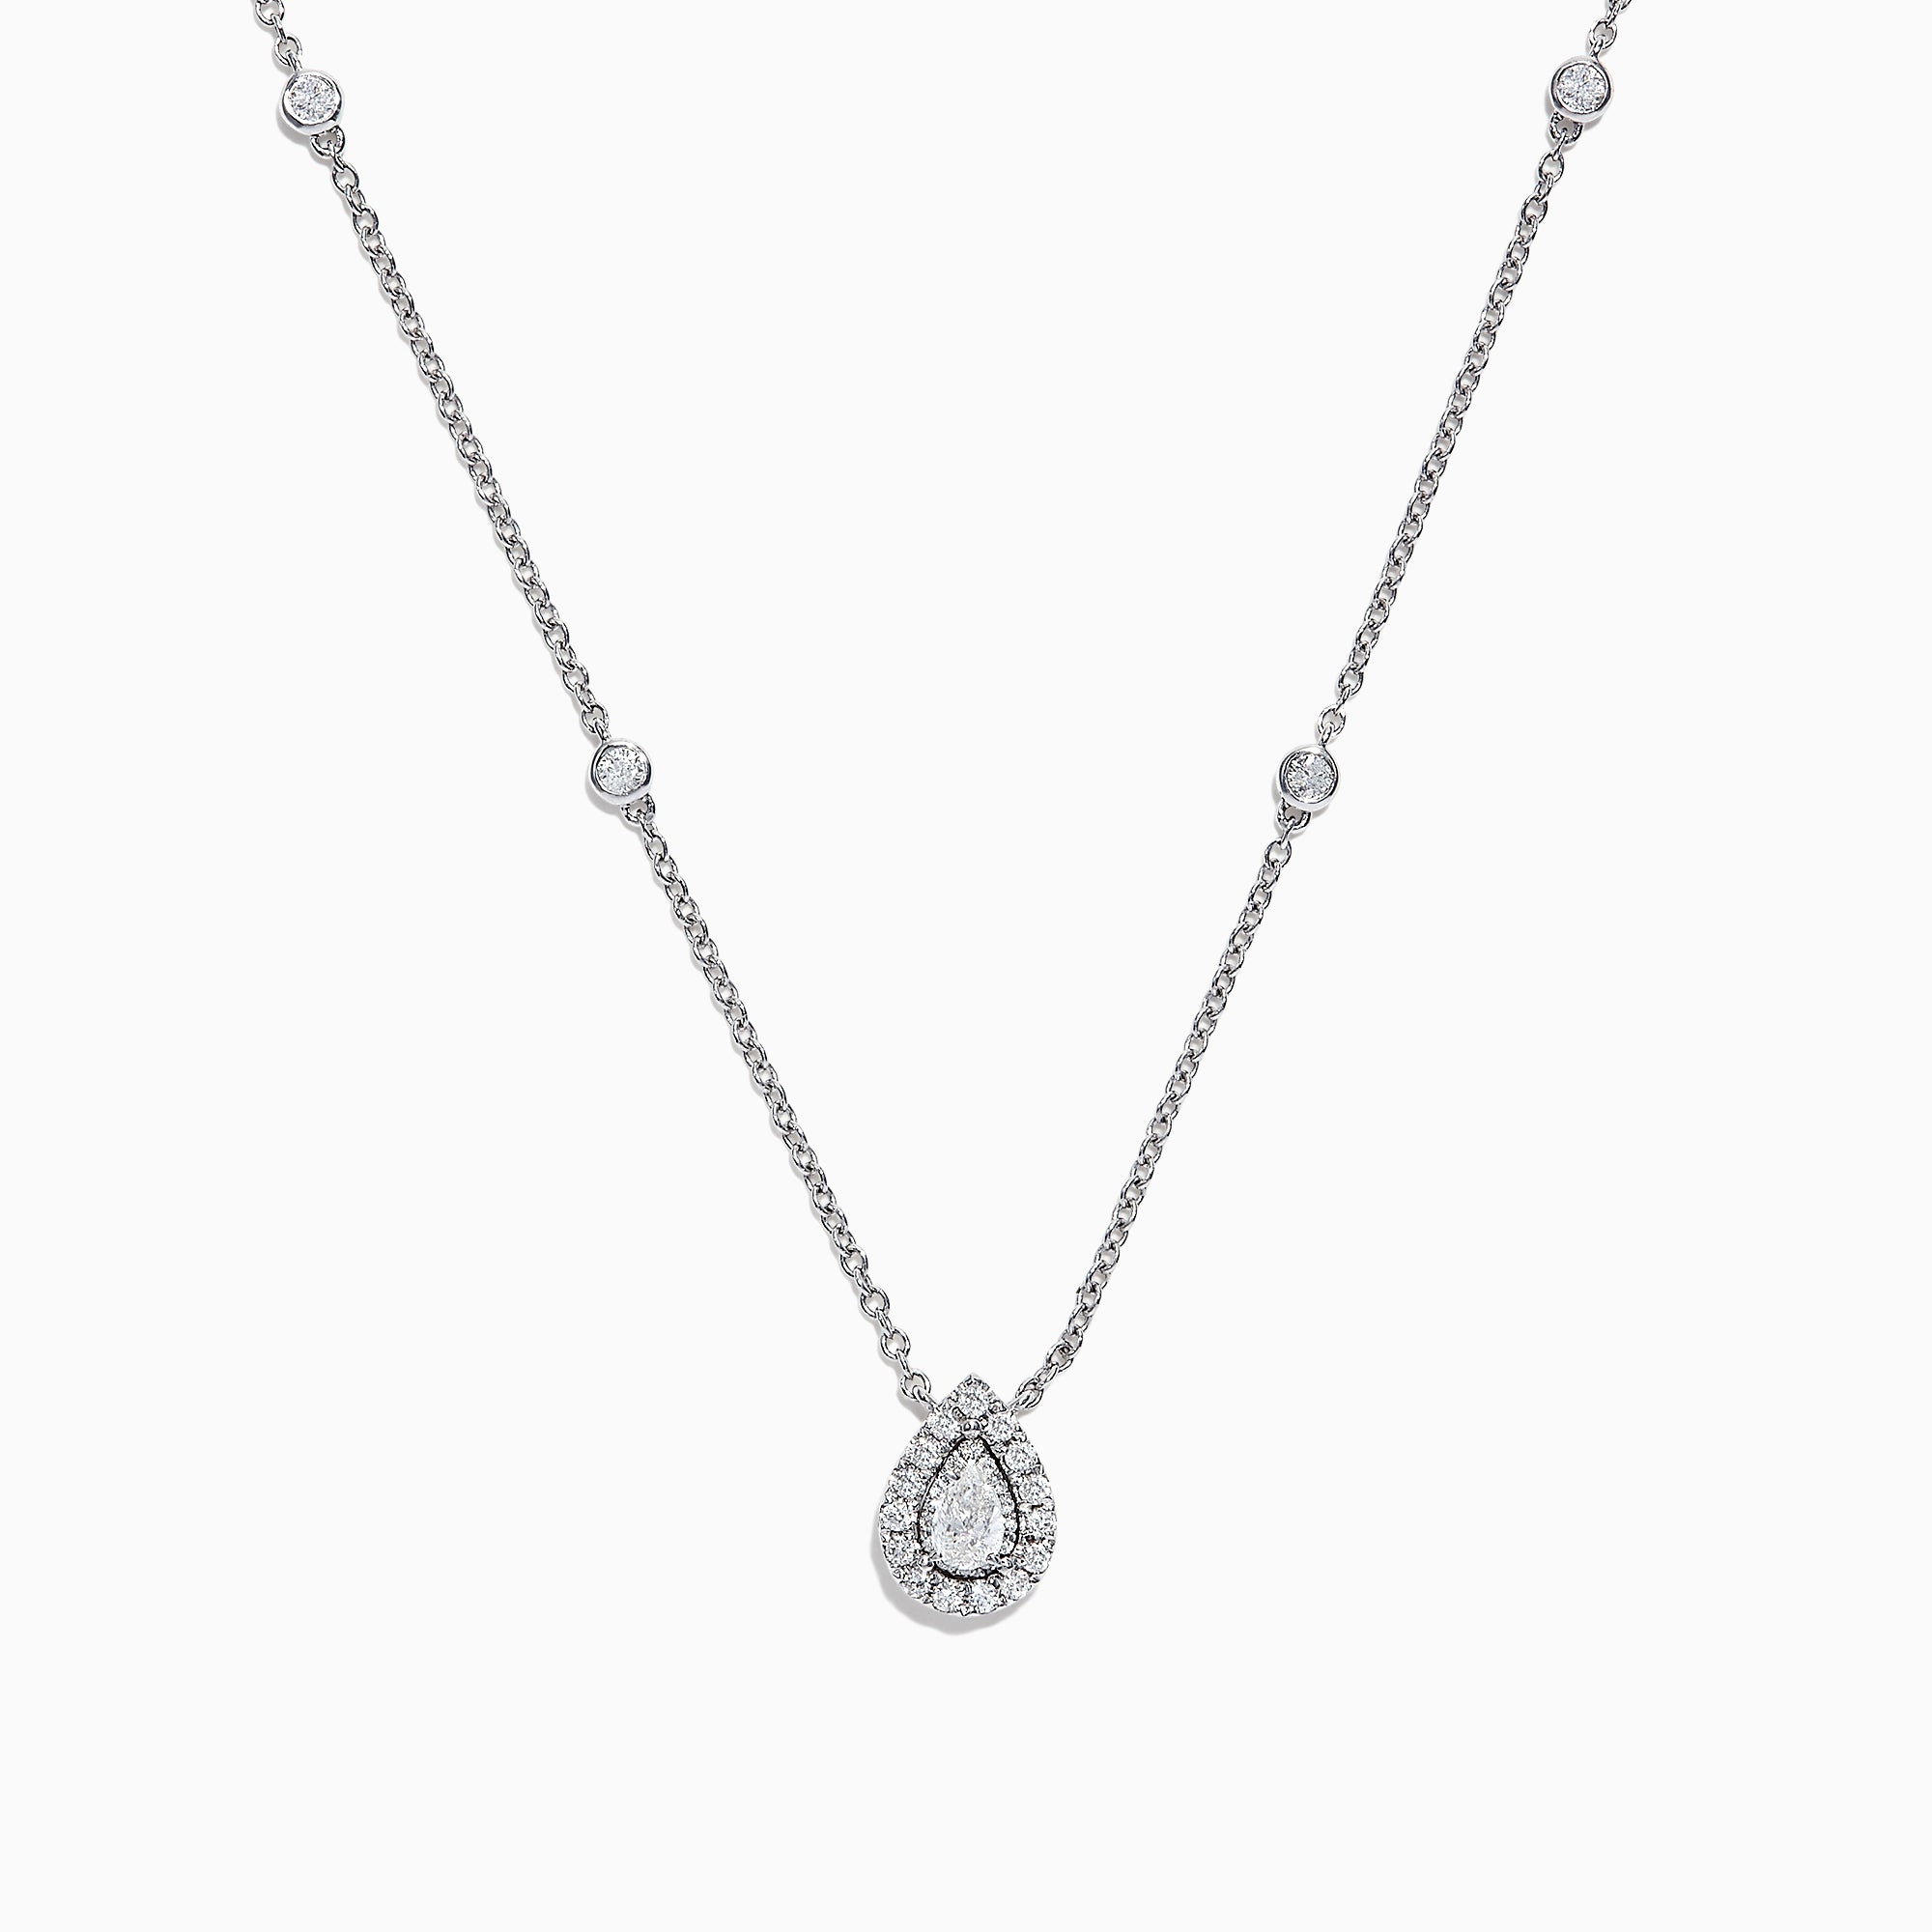 Effy Pave Classica 14K White Gold Diamond Pear Shaped Necklace, 0.38 TCW